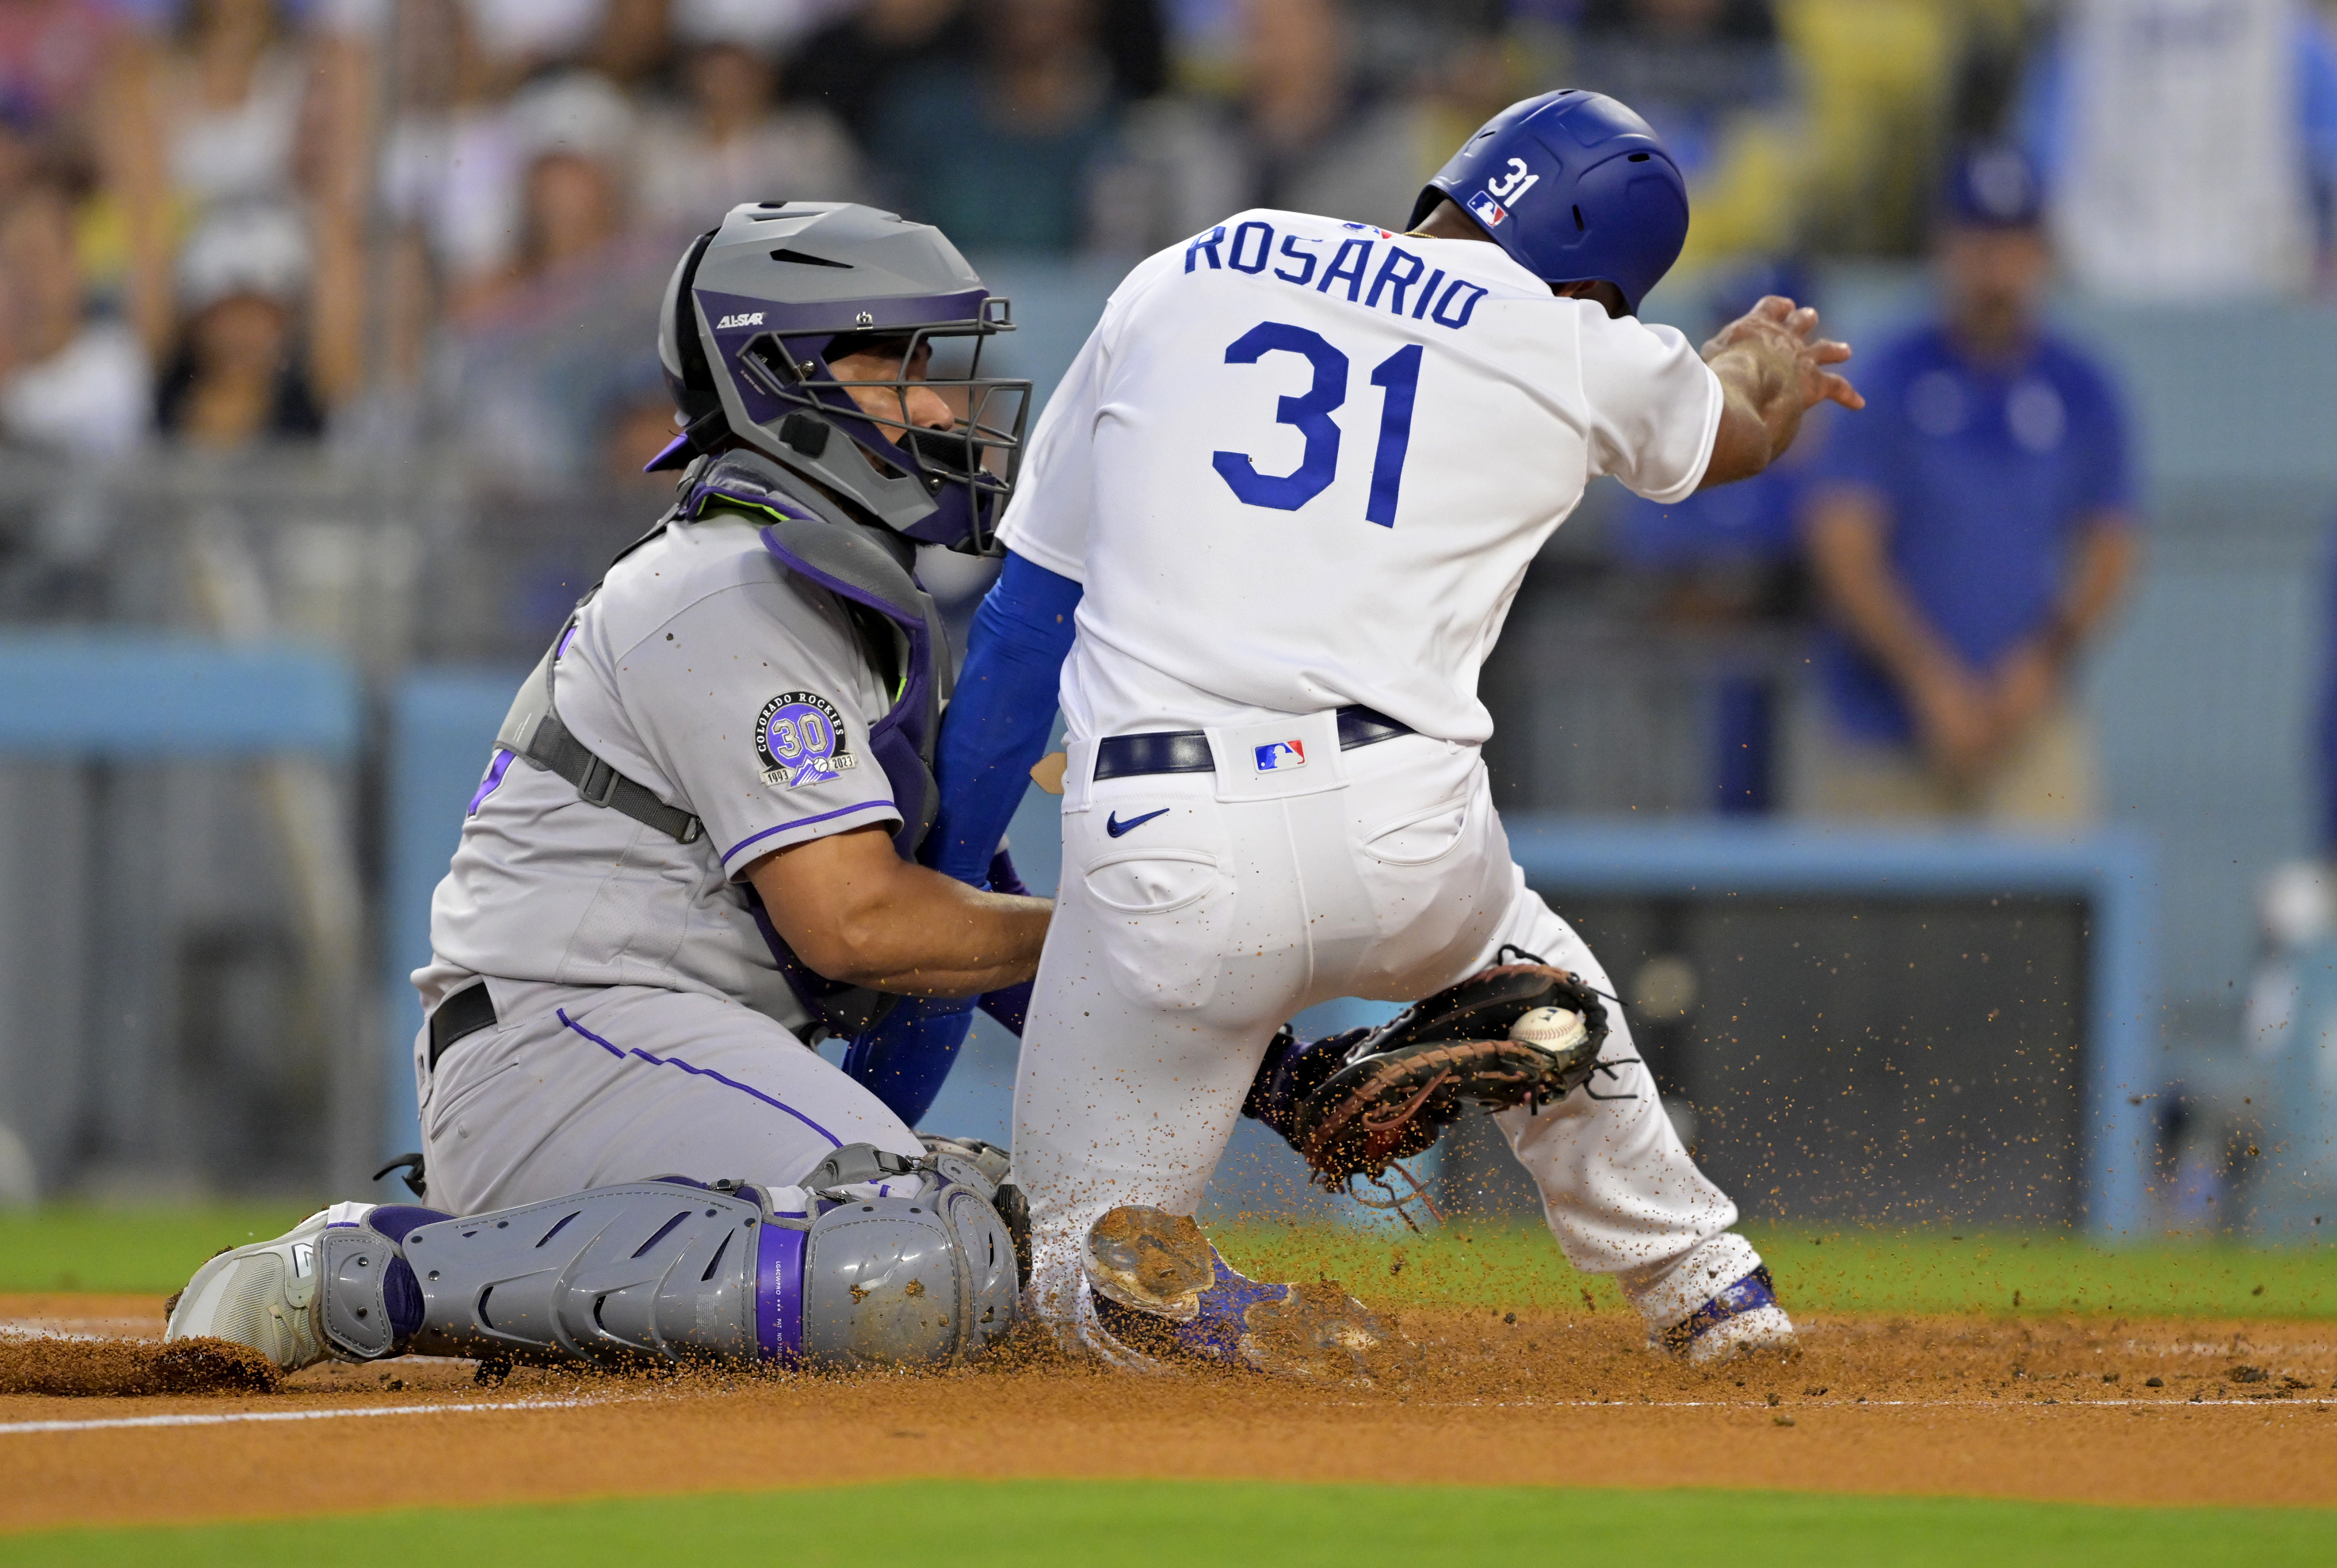 Dodgers beat Rockies 2-1 on Betts' infield single in 9th